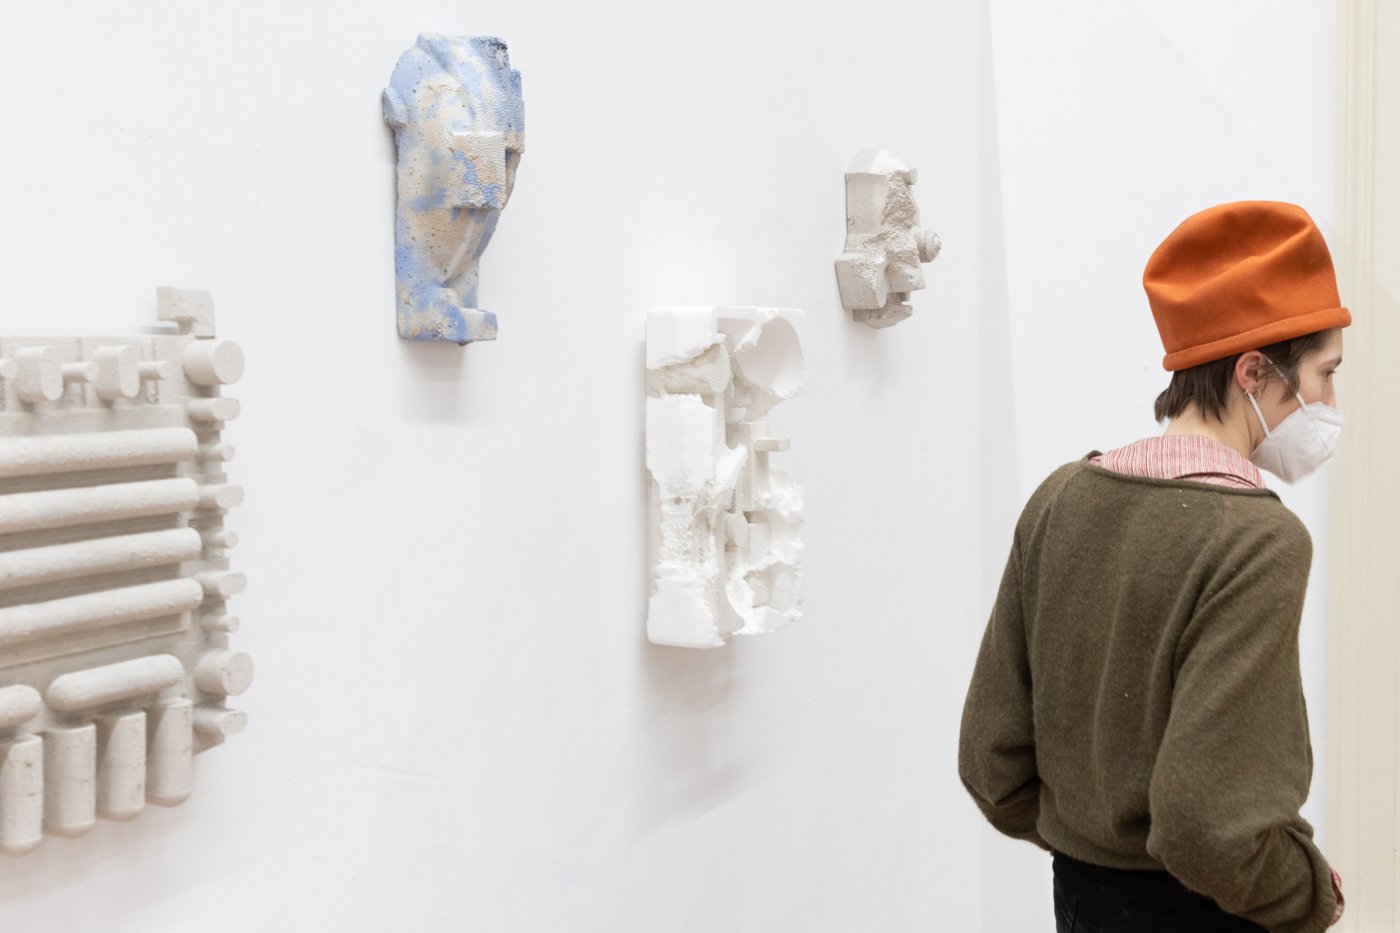 Visitor with striking orange hat in front of a wall with white abstract wall sculptures